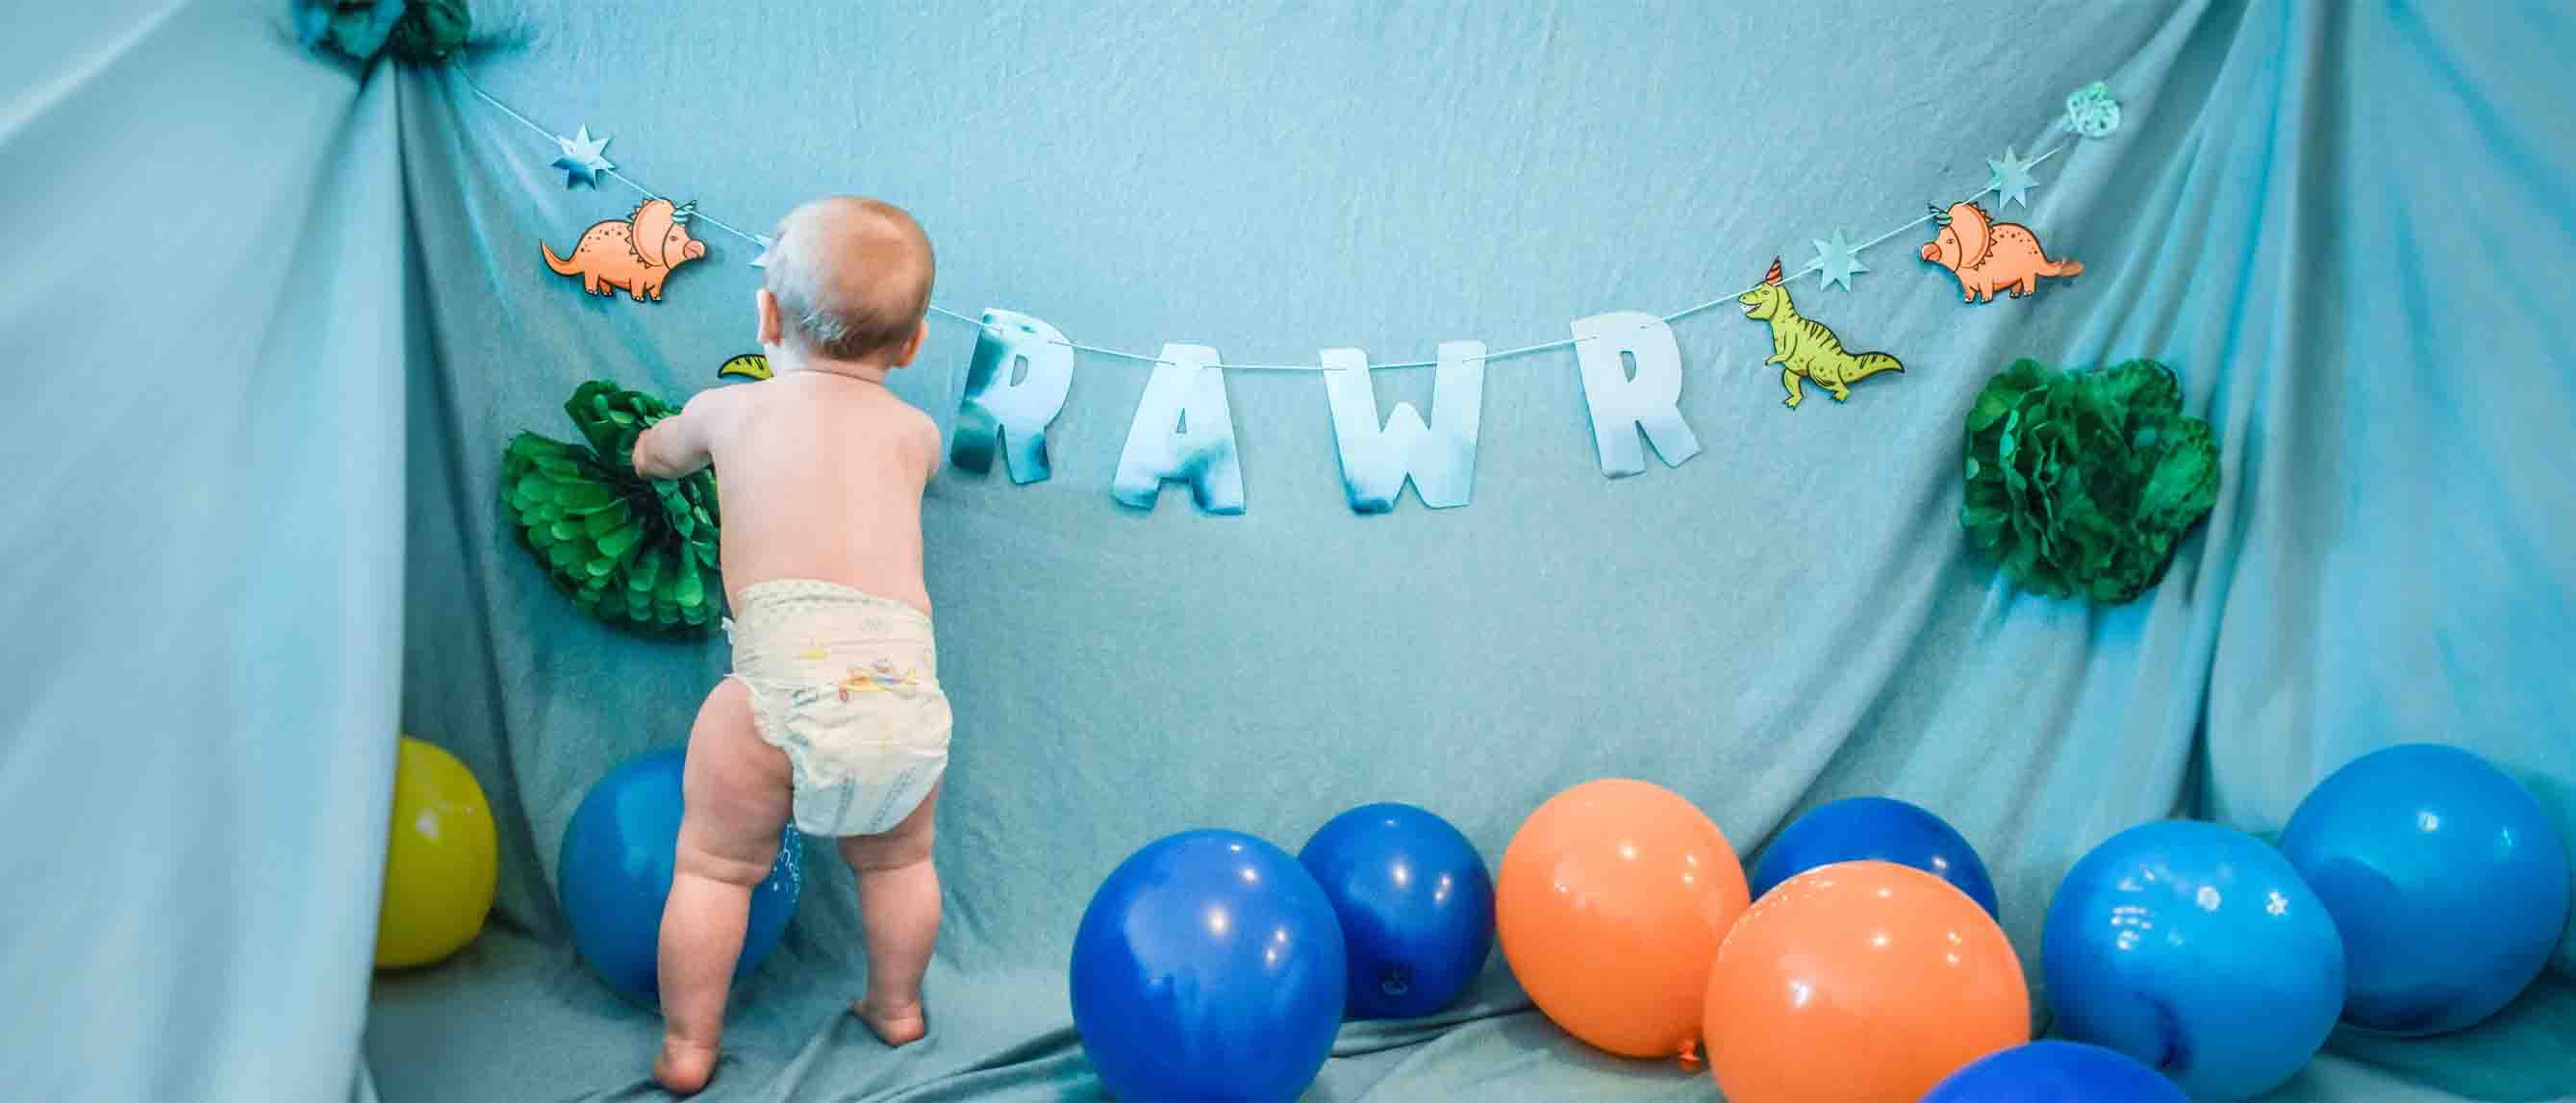 Baby wearing diaper against blue background with balloons